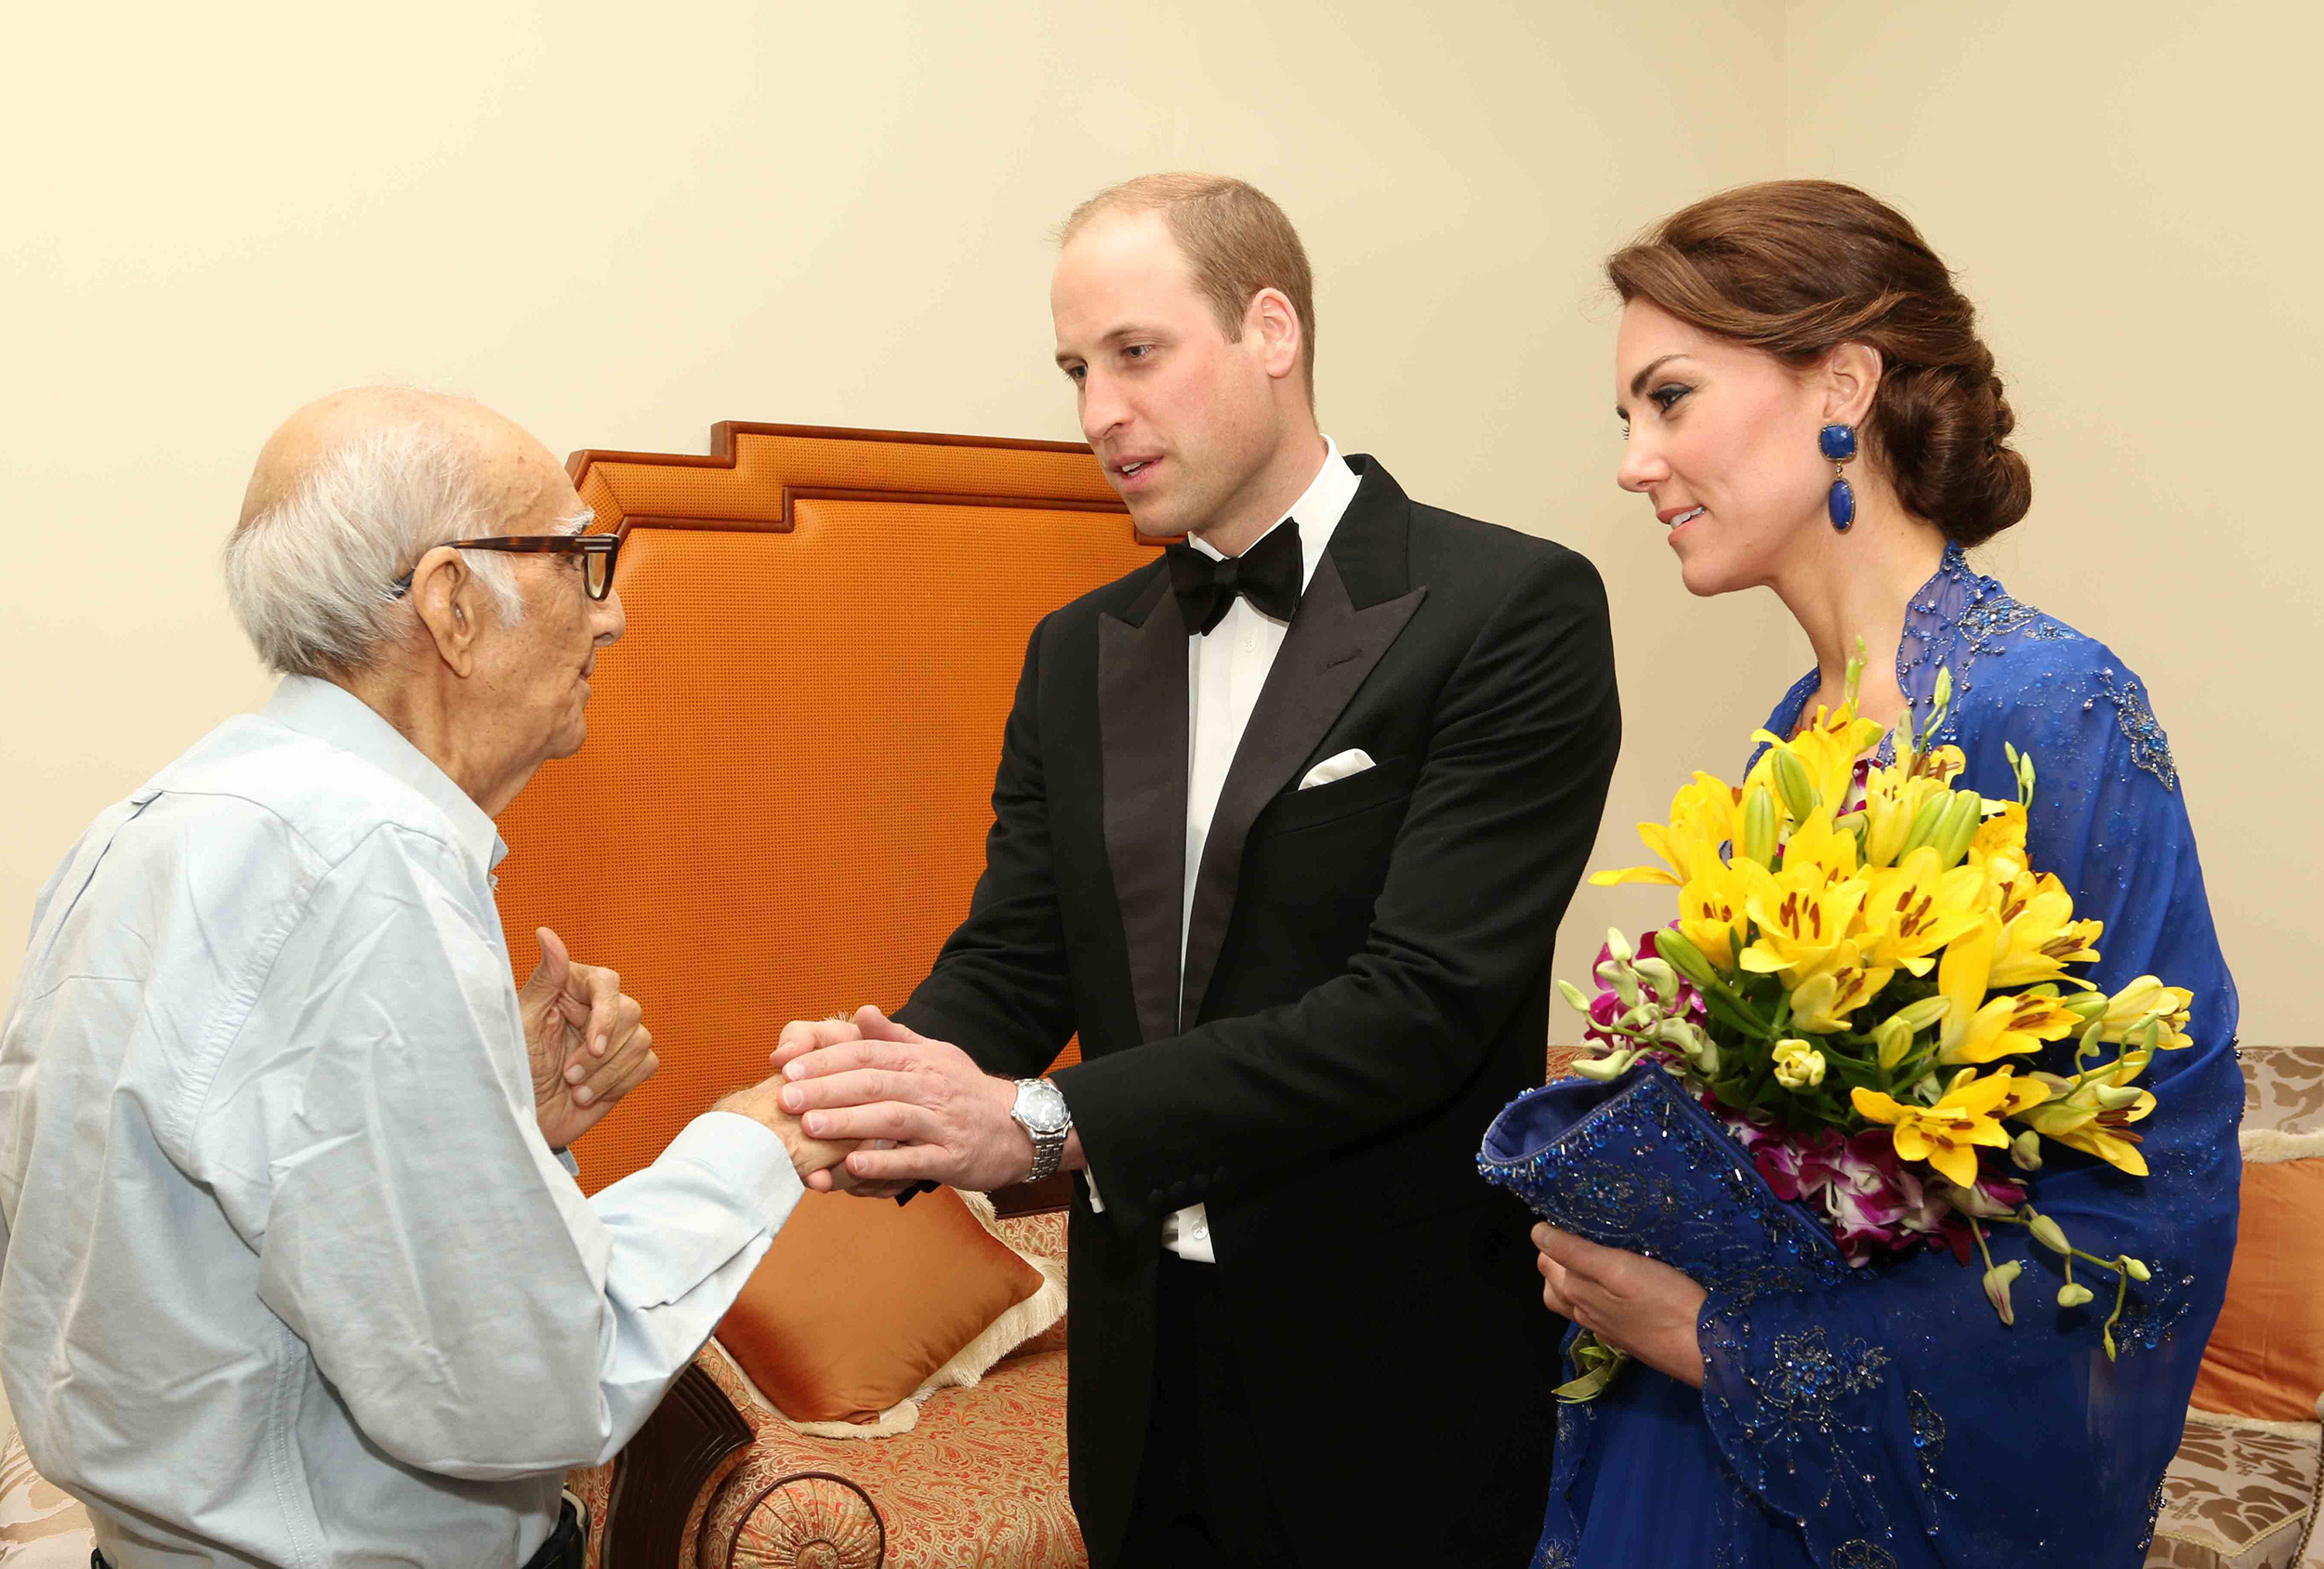 Prince William, Duke of Cambridge and Catherine, Duchess of Cambridge speak with Boman Kohinoor  during a meeting in Mumbai on April 10, 2016.  Kohinoor, 93, has a strong claim to be India's biggest fan of the British royal family.